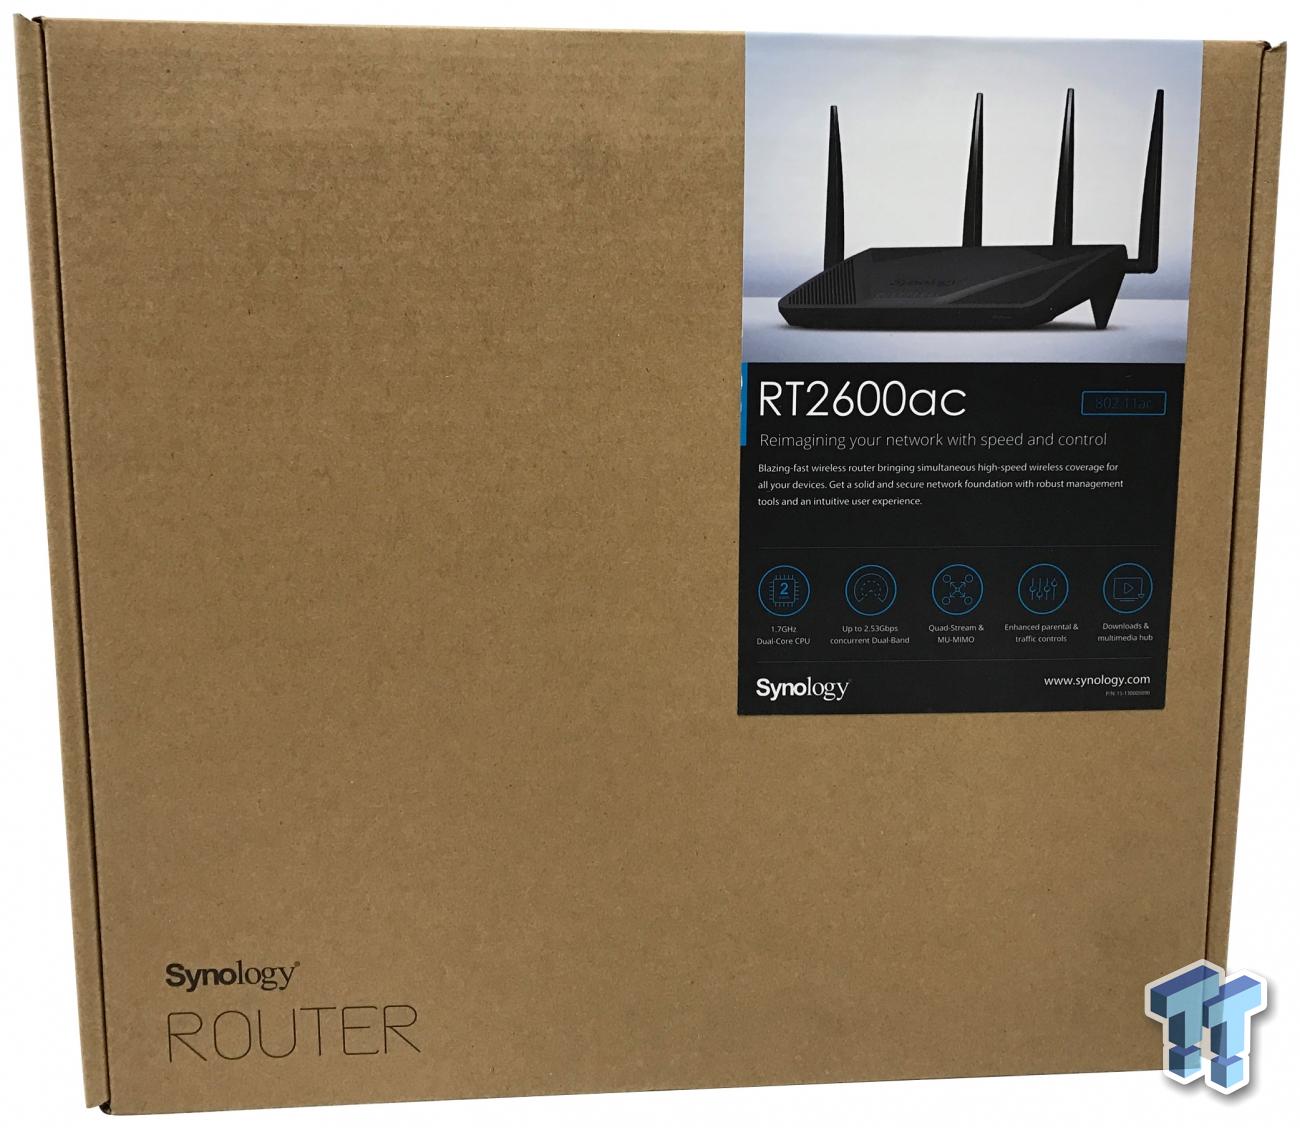 Synology RT2600ac Wireless Router Review